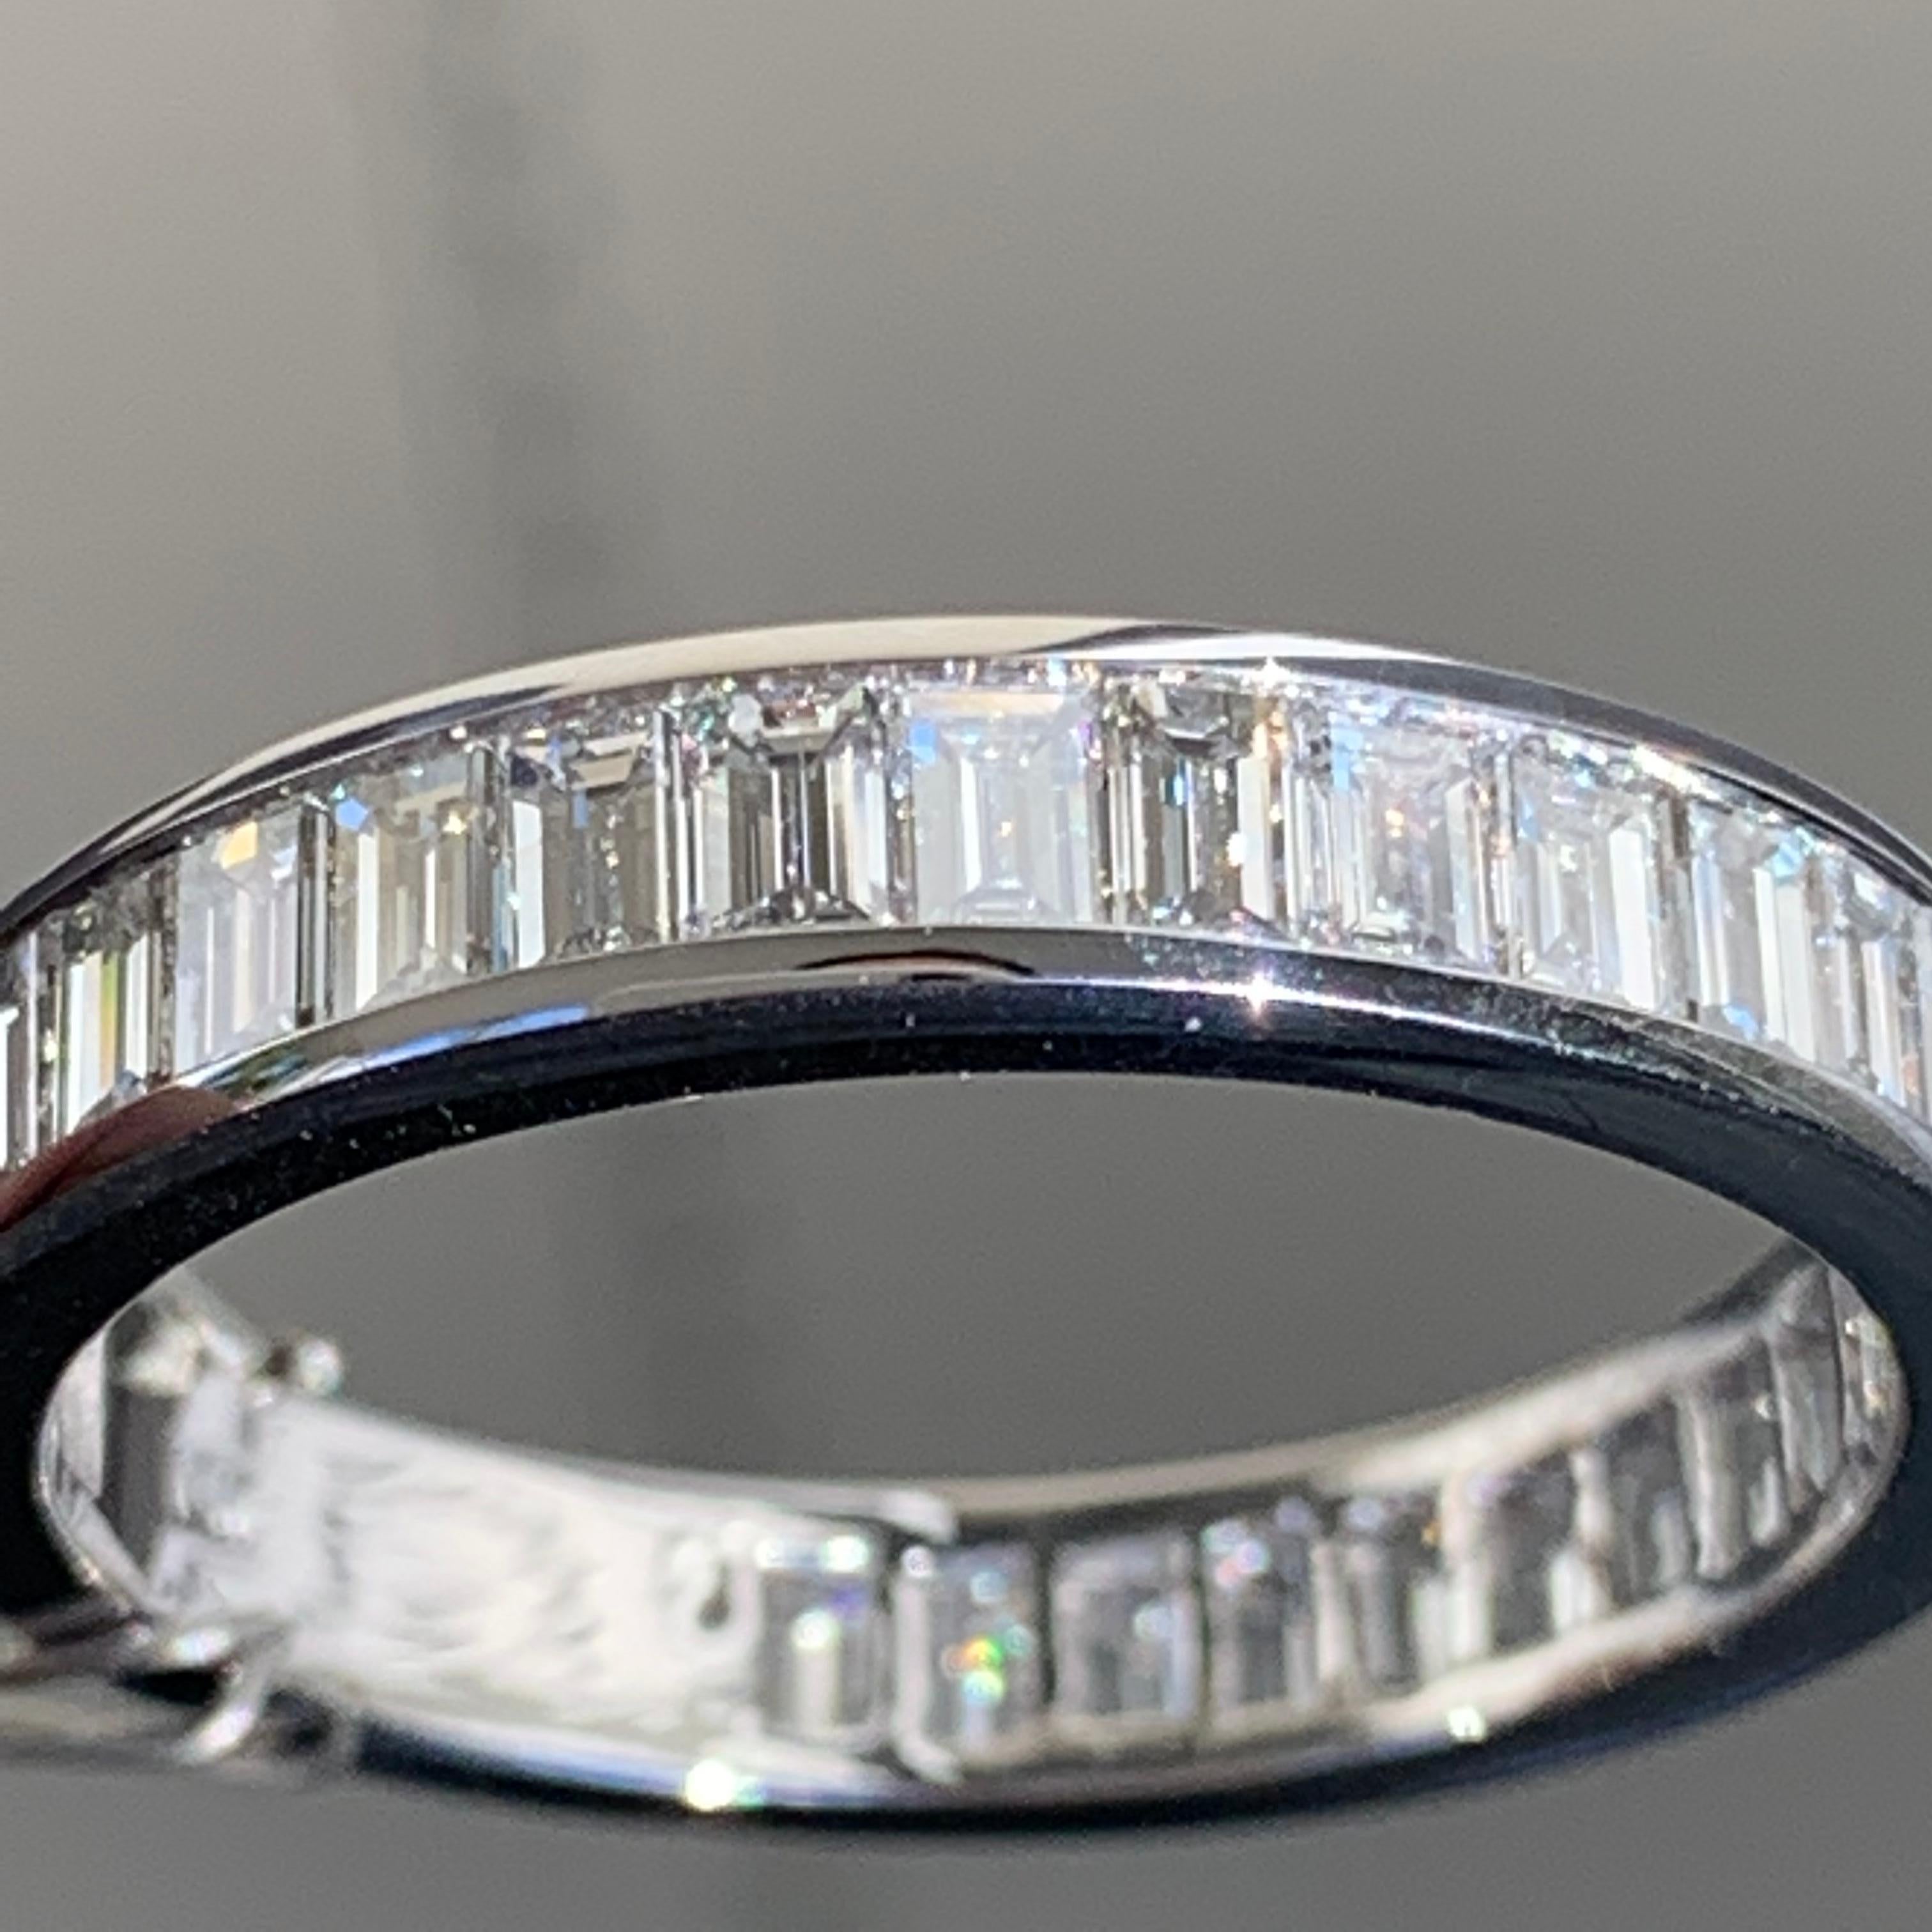 ABC097-0600030

Can be sized to any finger size, ring will be made to order and take approximately 1-3 weeks from customers final design approval. If you need a sooner date let us know and we will see if we can accommodate you. Carat weight and